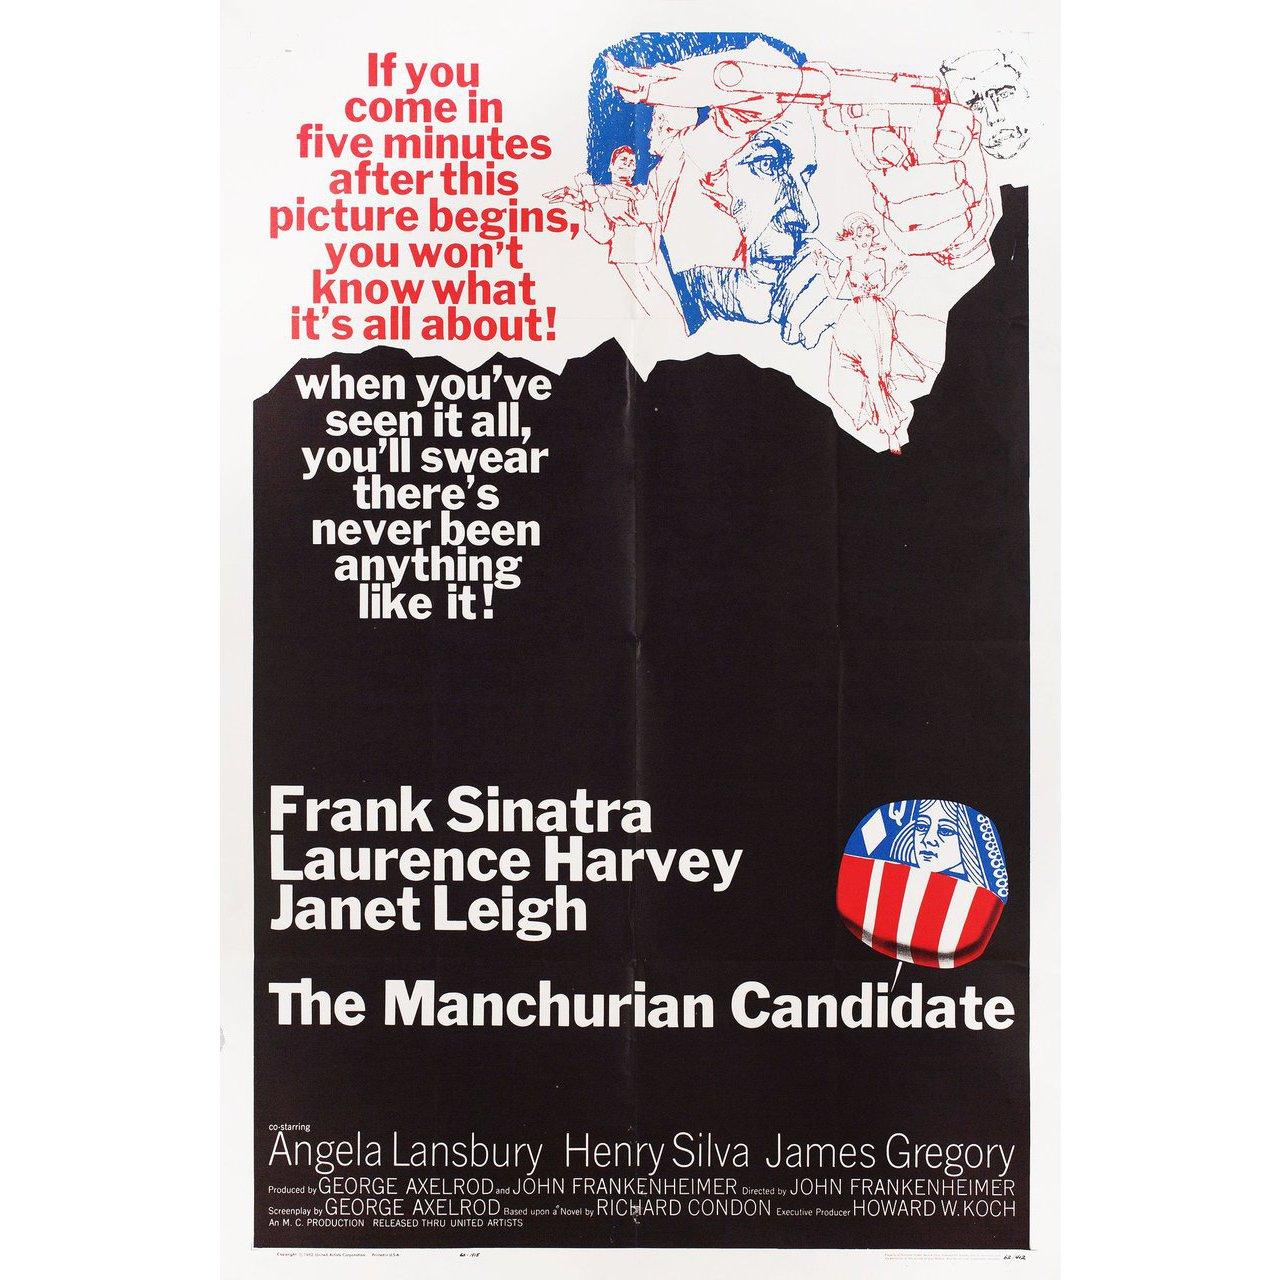 Original 1962 U.S. one sheet poster for the film The Manchurian Candidate directed by John Frankenheimer with Frank Sinatra / Laurence Harvey / Janet Leigh / Angela Lansbury. Very good-fine condition, folded with pinholes. Many original posters were